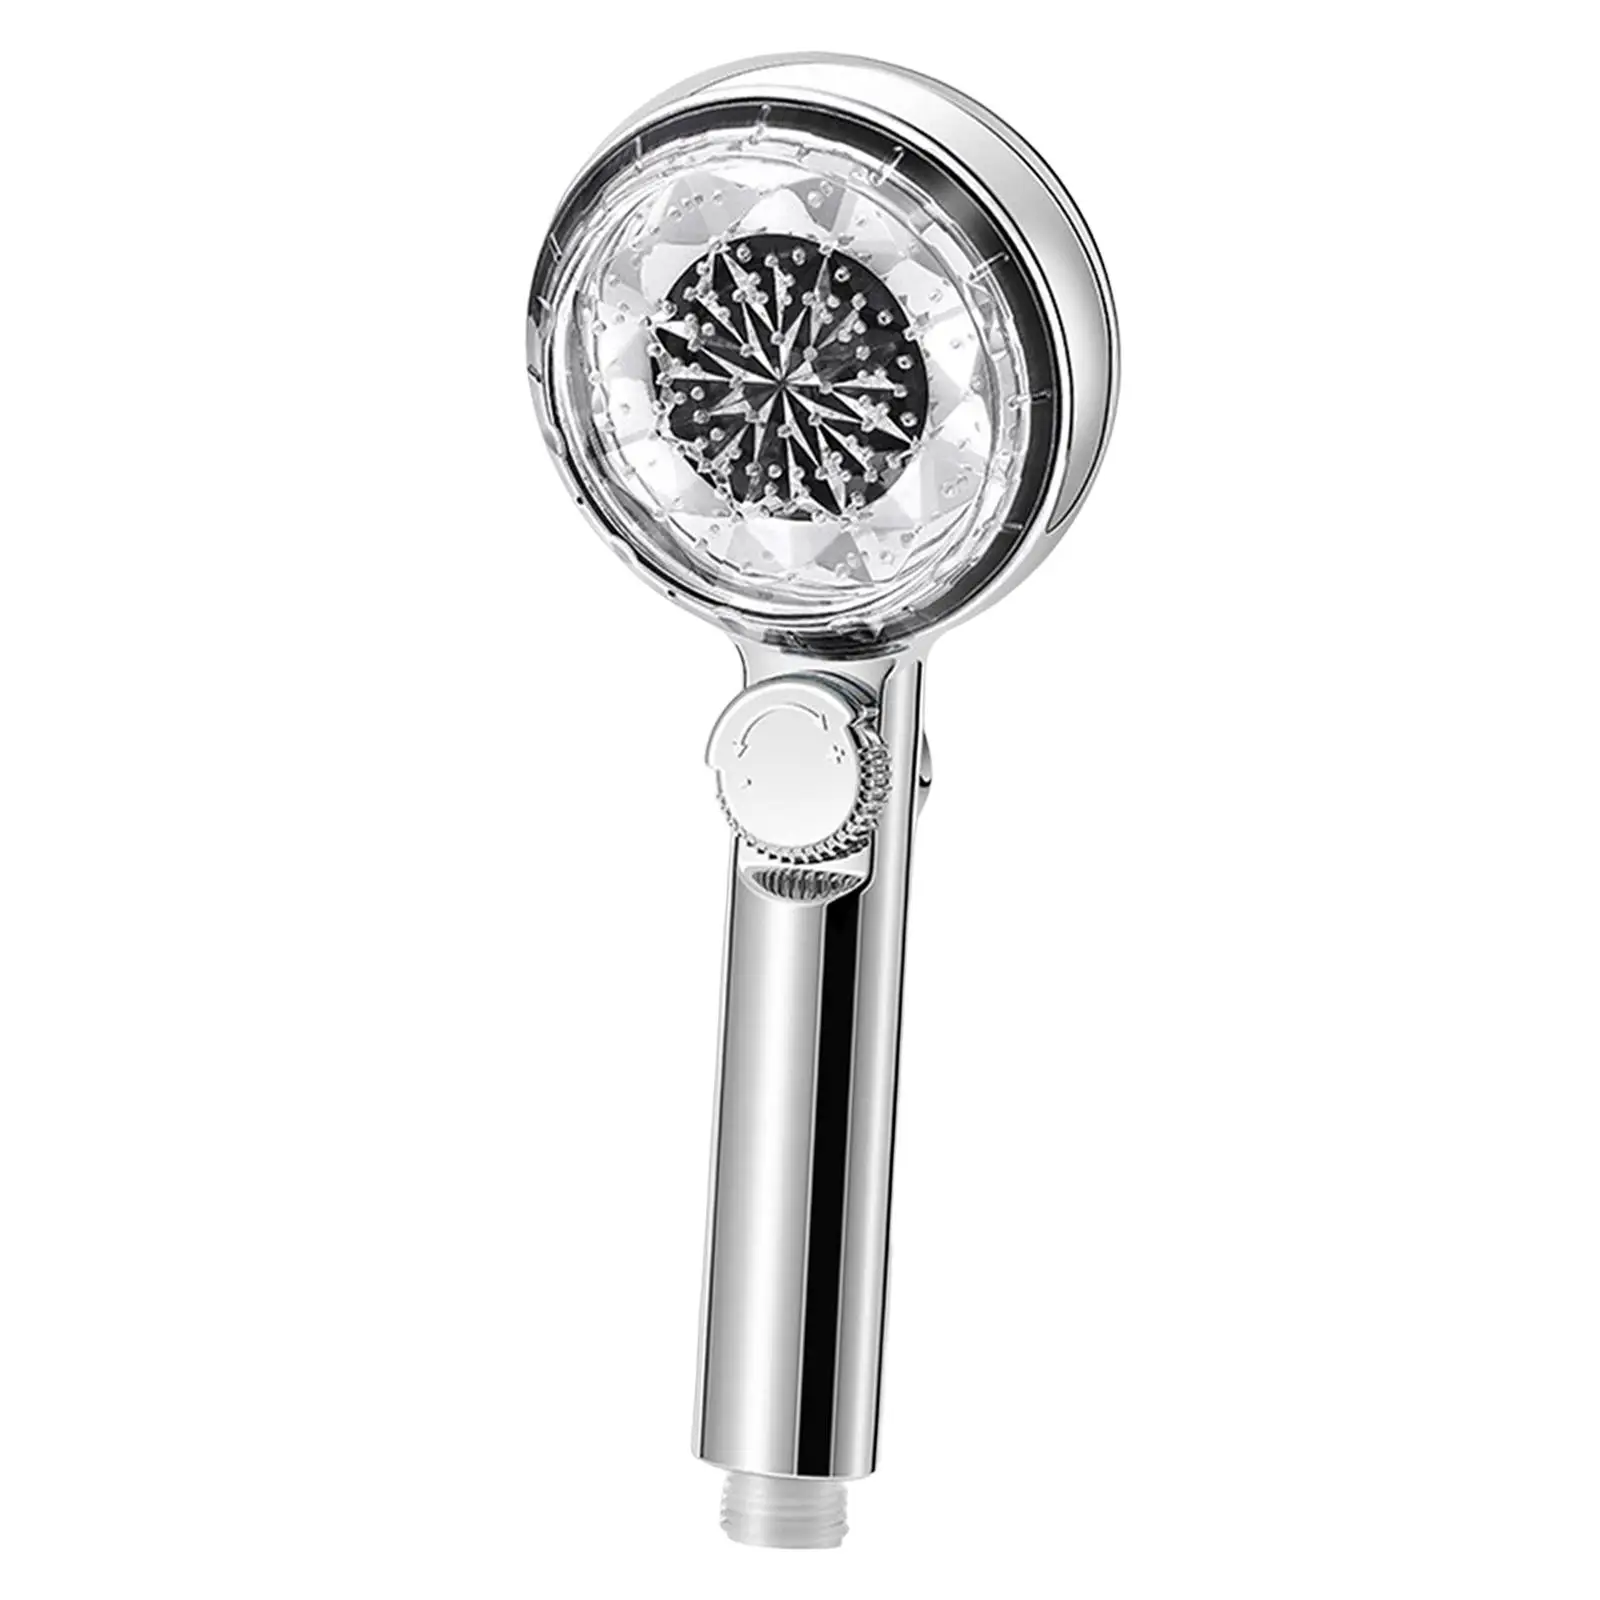 Handheld Showerhead Detachable with Adjustable Button Intelligent Temperature Control Universal Booster Shower Head for Bathroom